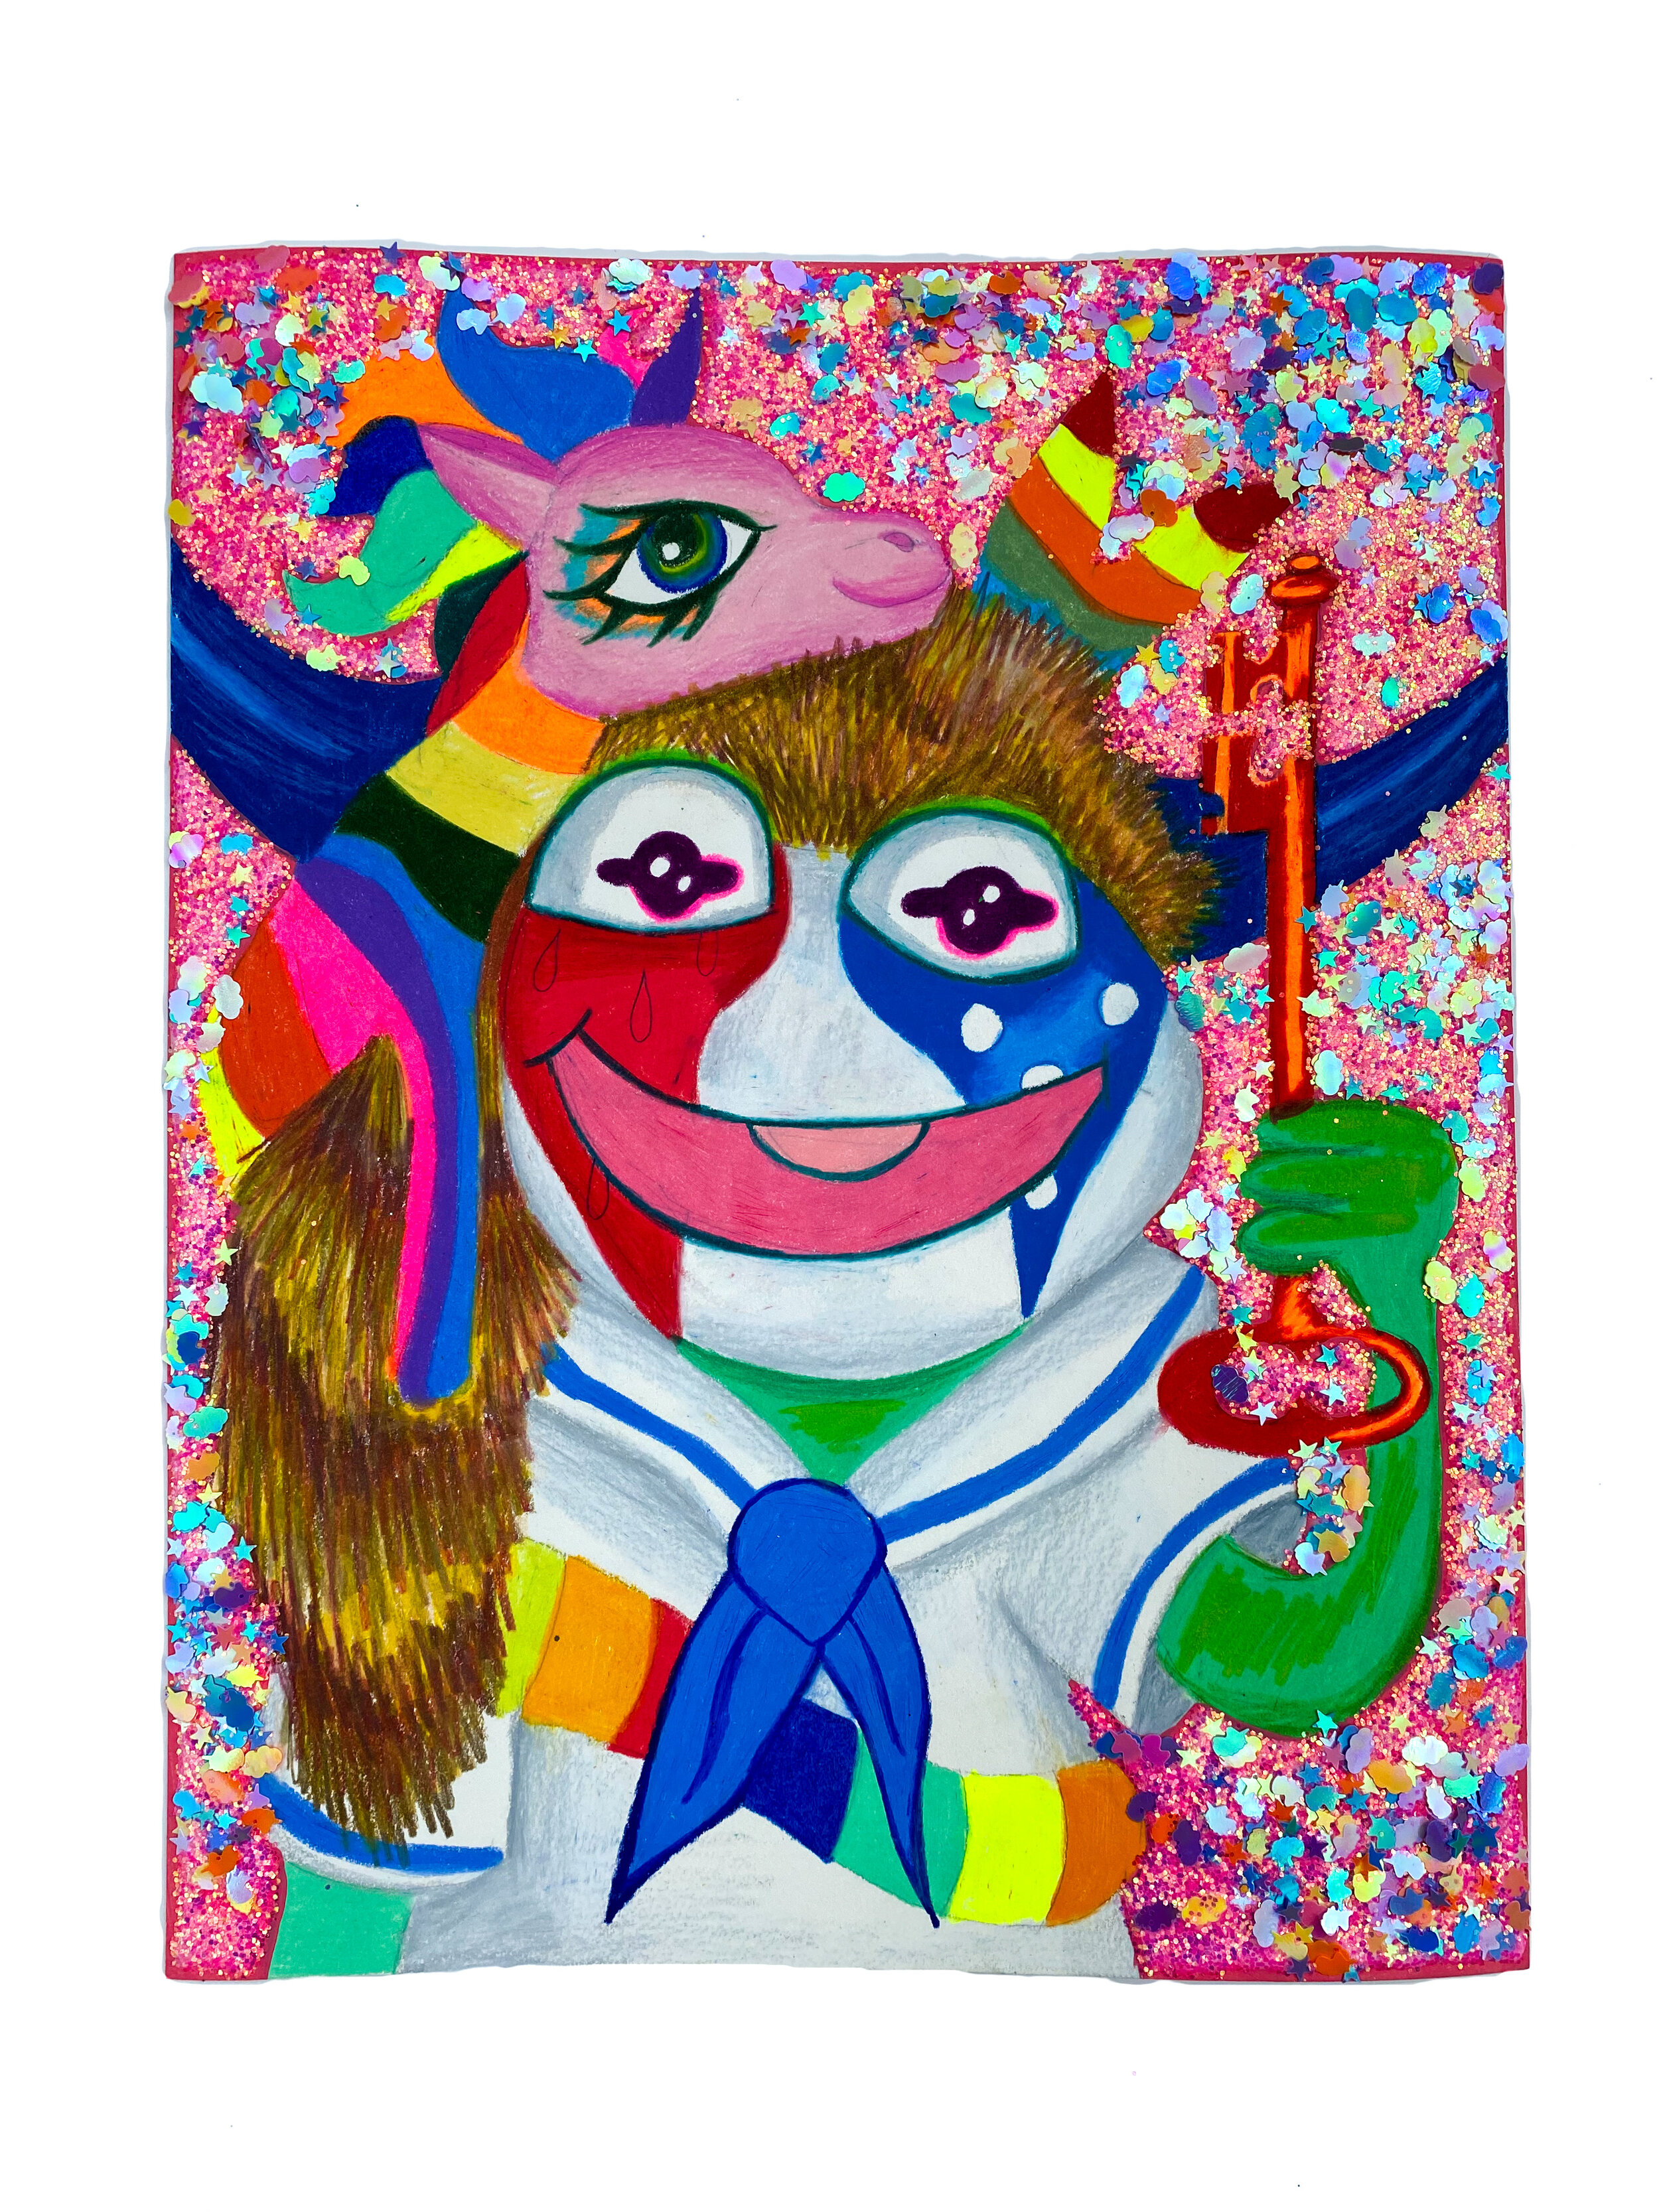   Keys to the Kingdom (Muppet Baby Kermit Q Shaman with Ashamed Girls Pony Dolphin),  2021  14 x 11 inches (35.56 x 27.94 cm.)  Colored pencil, acrylic paint, Elmer's glue, Modge Podge, and glitter on paper 